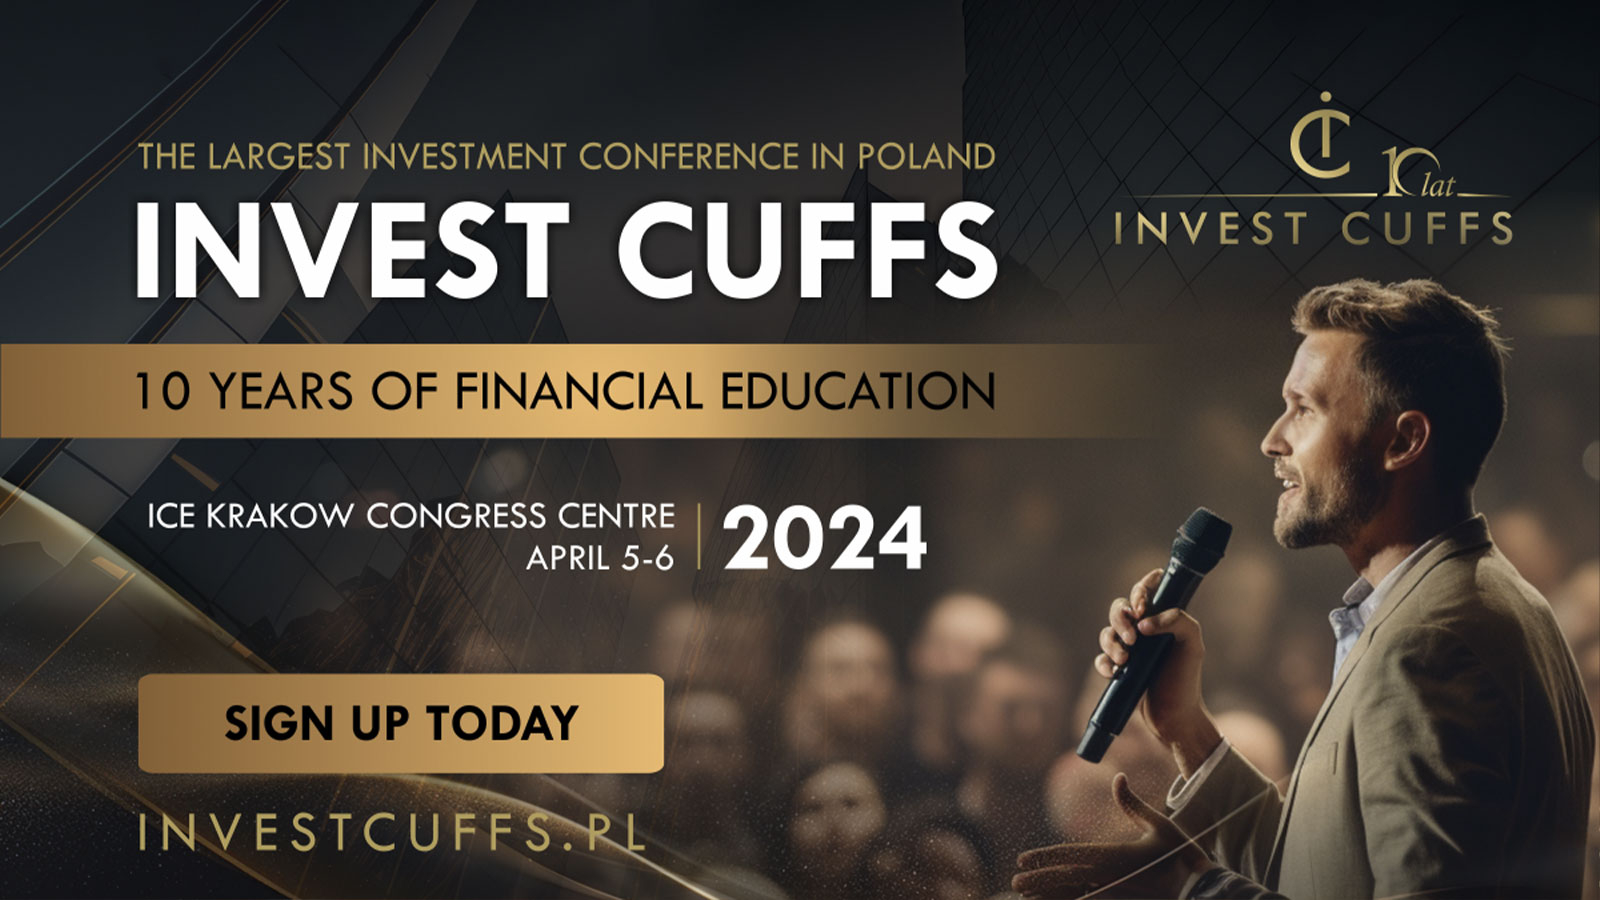 Find Out How the Best Are Investing! Invest Cuffs 2024 Conference on April 5-6